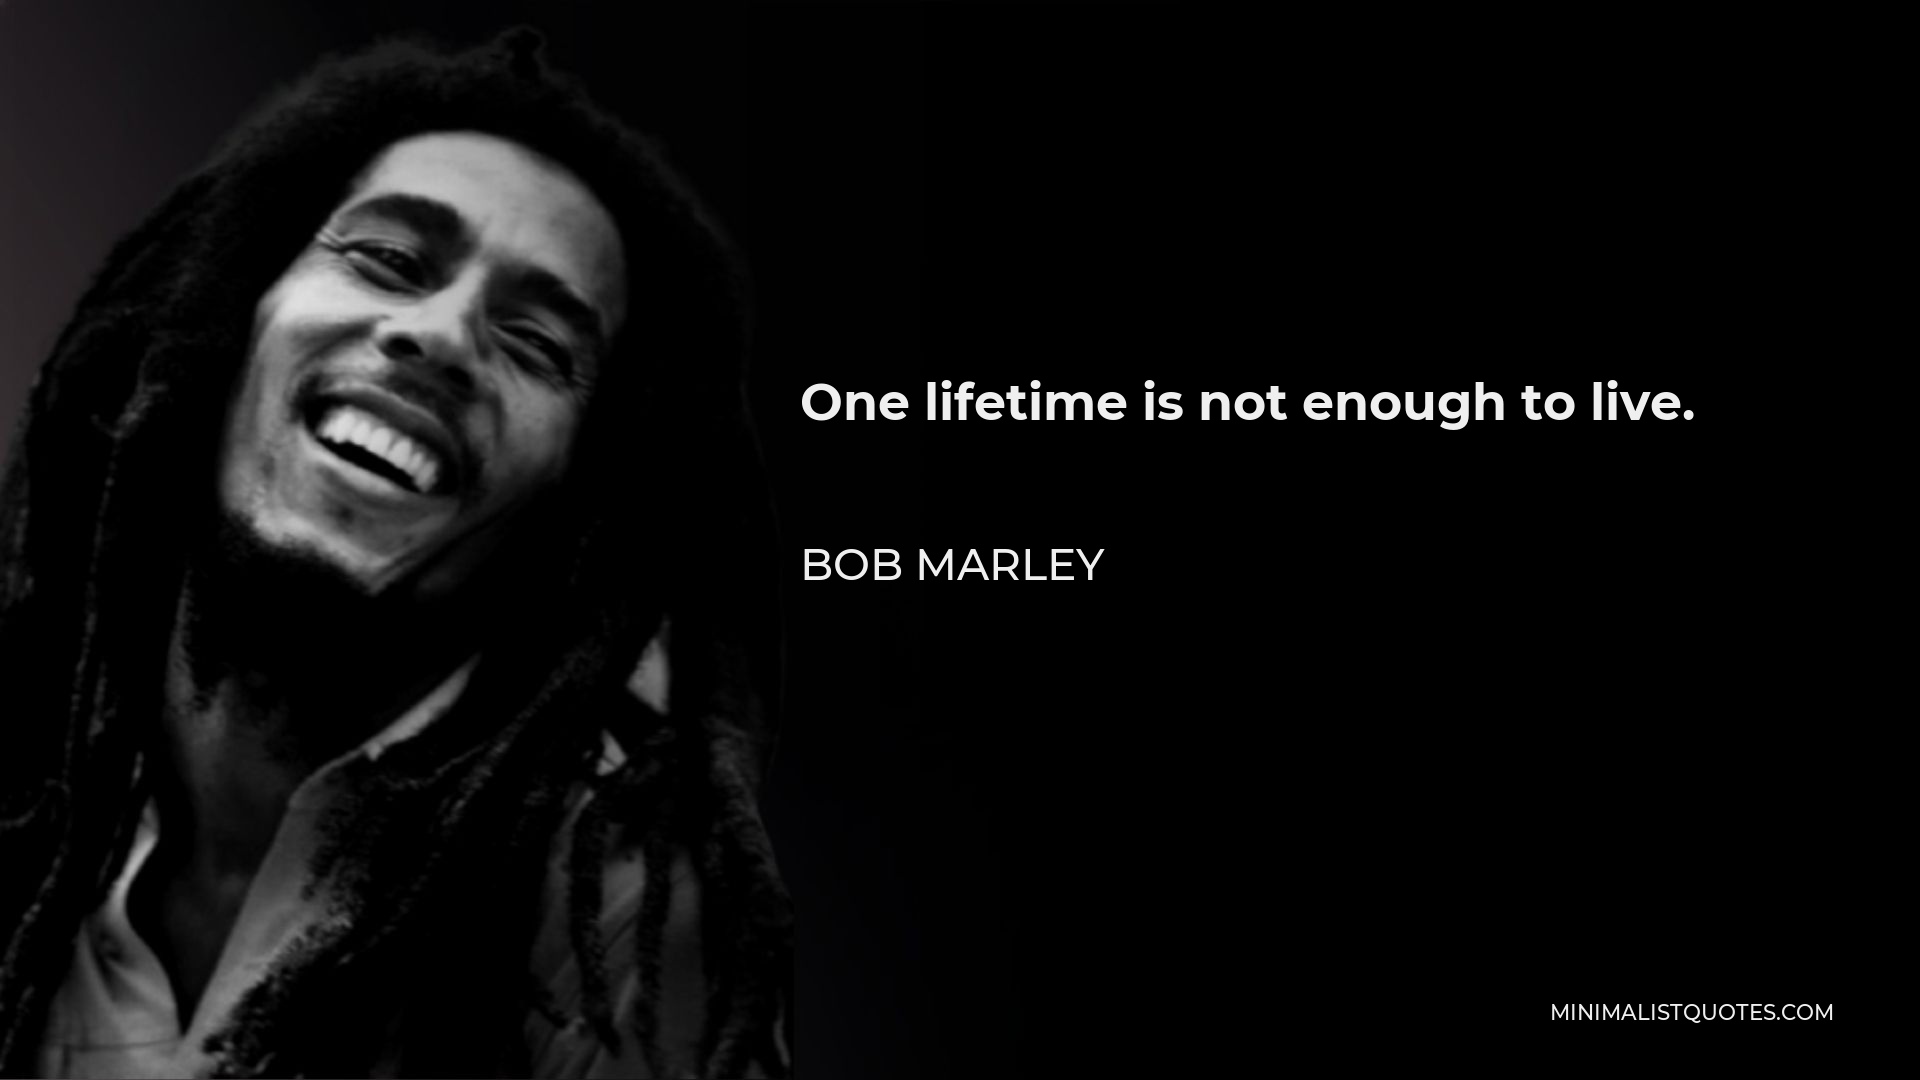 Bob Marley Quote - One lifetime is not enough to live.